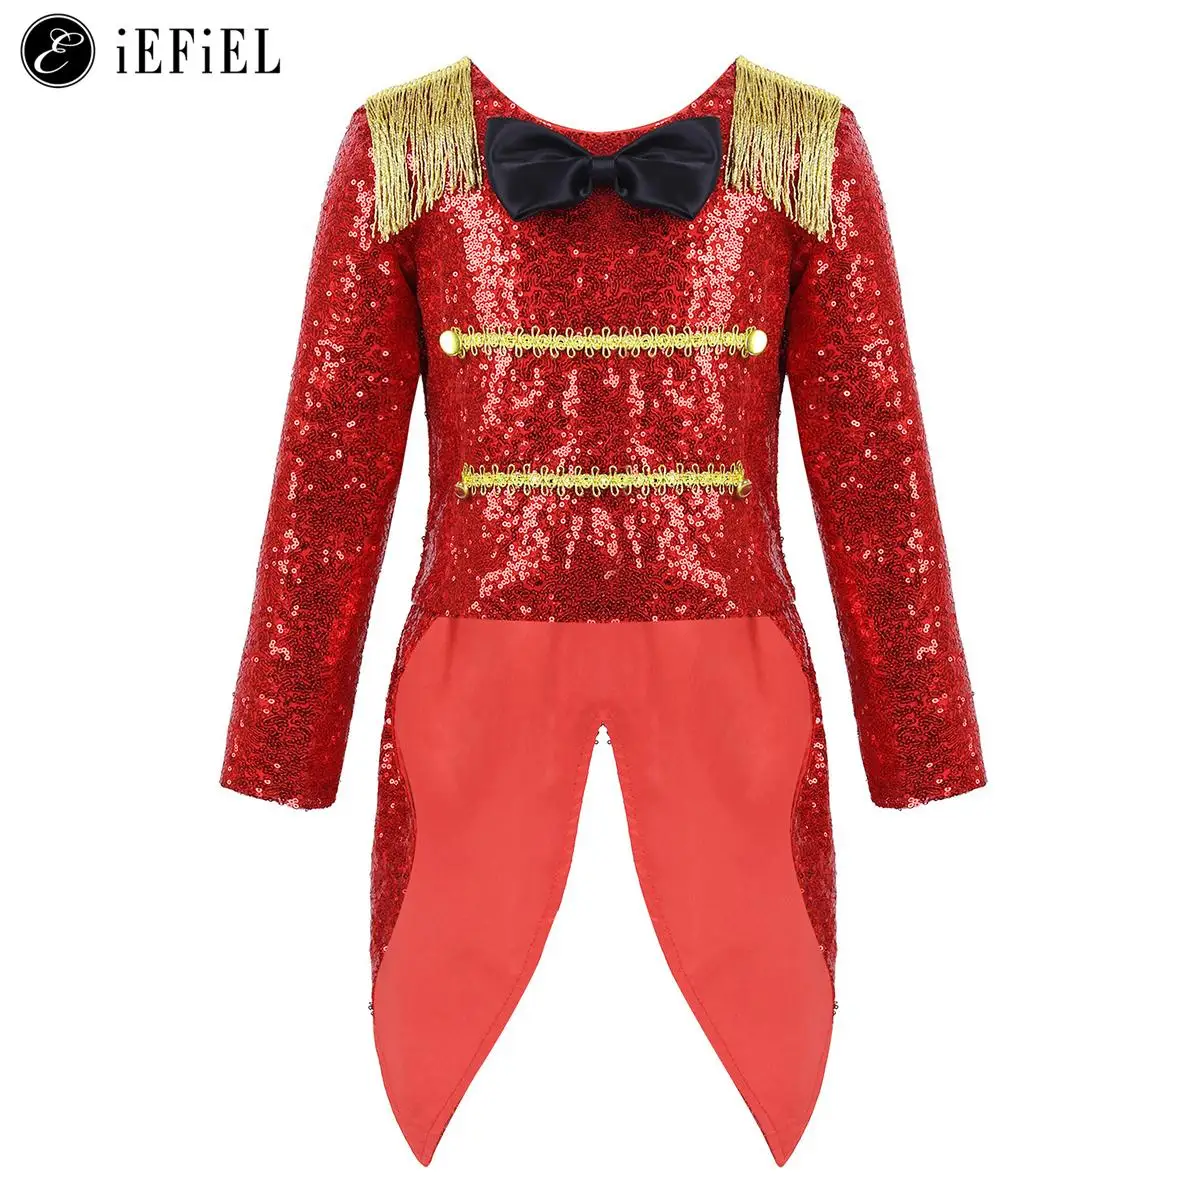 

Kids Boys Girls Circus Ringmaster Costume Halloween Lion Tamer Showman Long Sleeves Tailcoat Jack Cosplay Party Fancy Dress Up